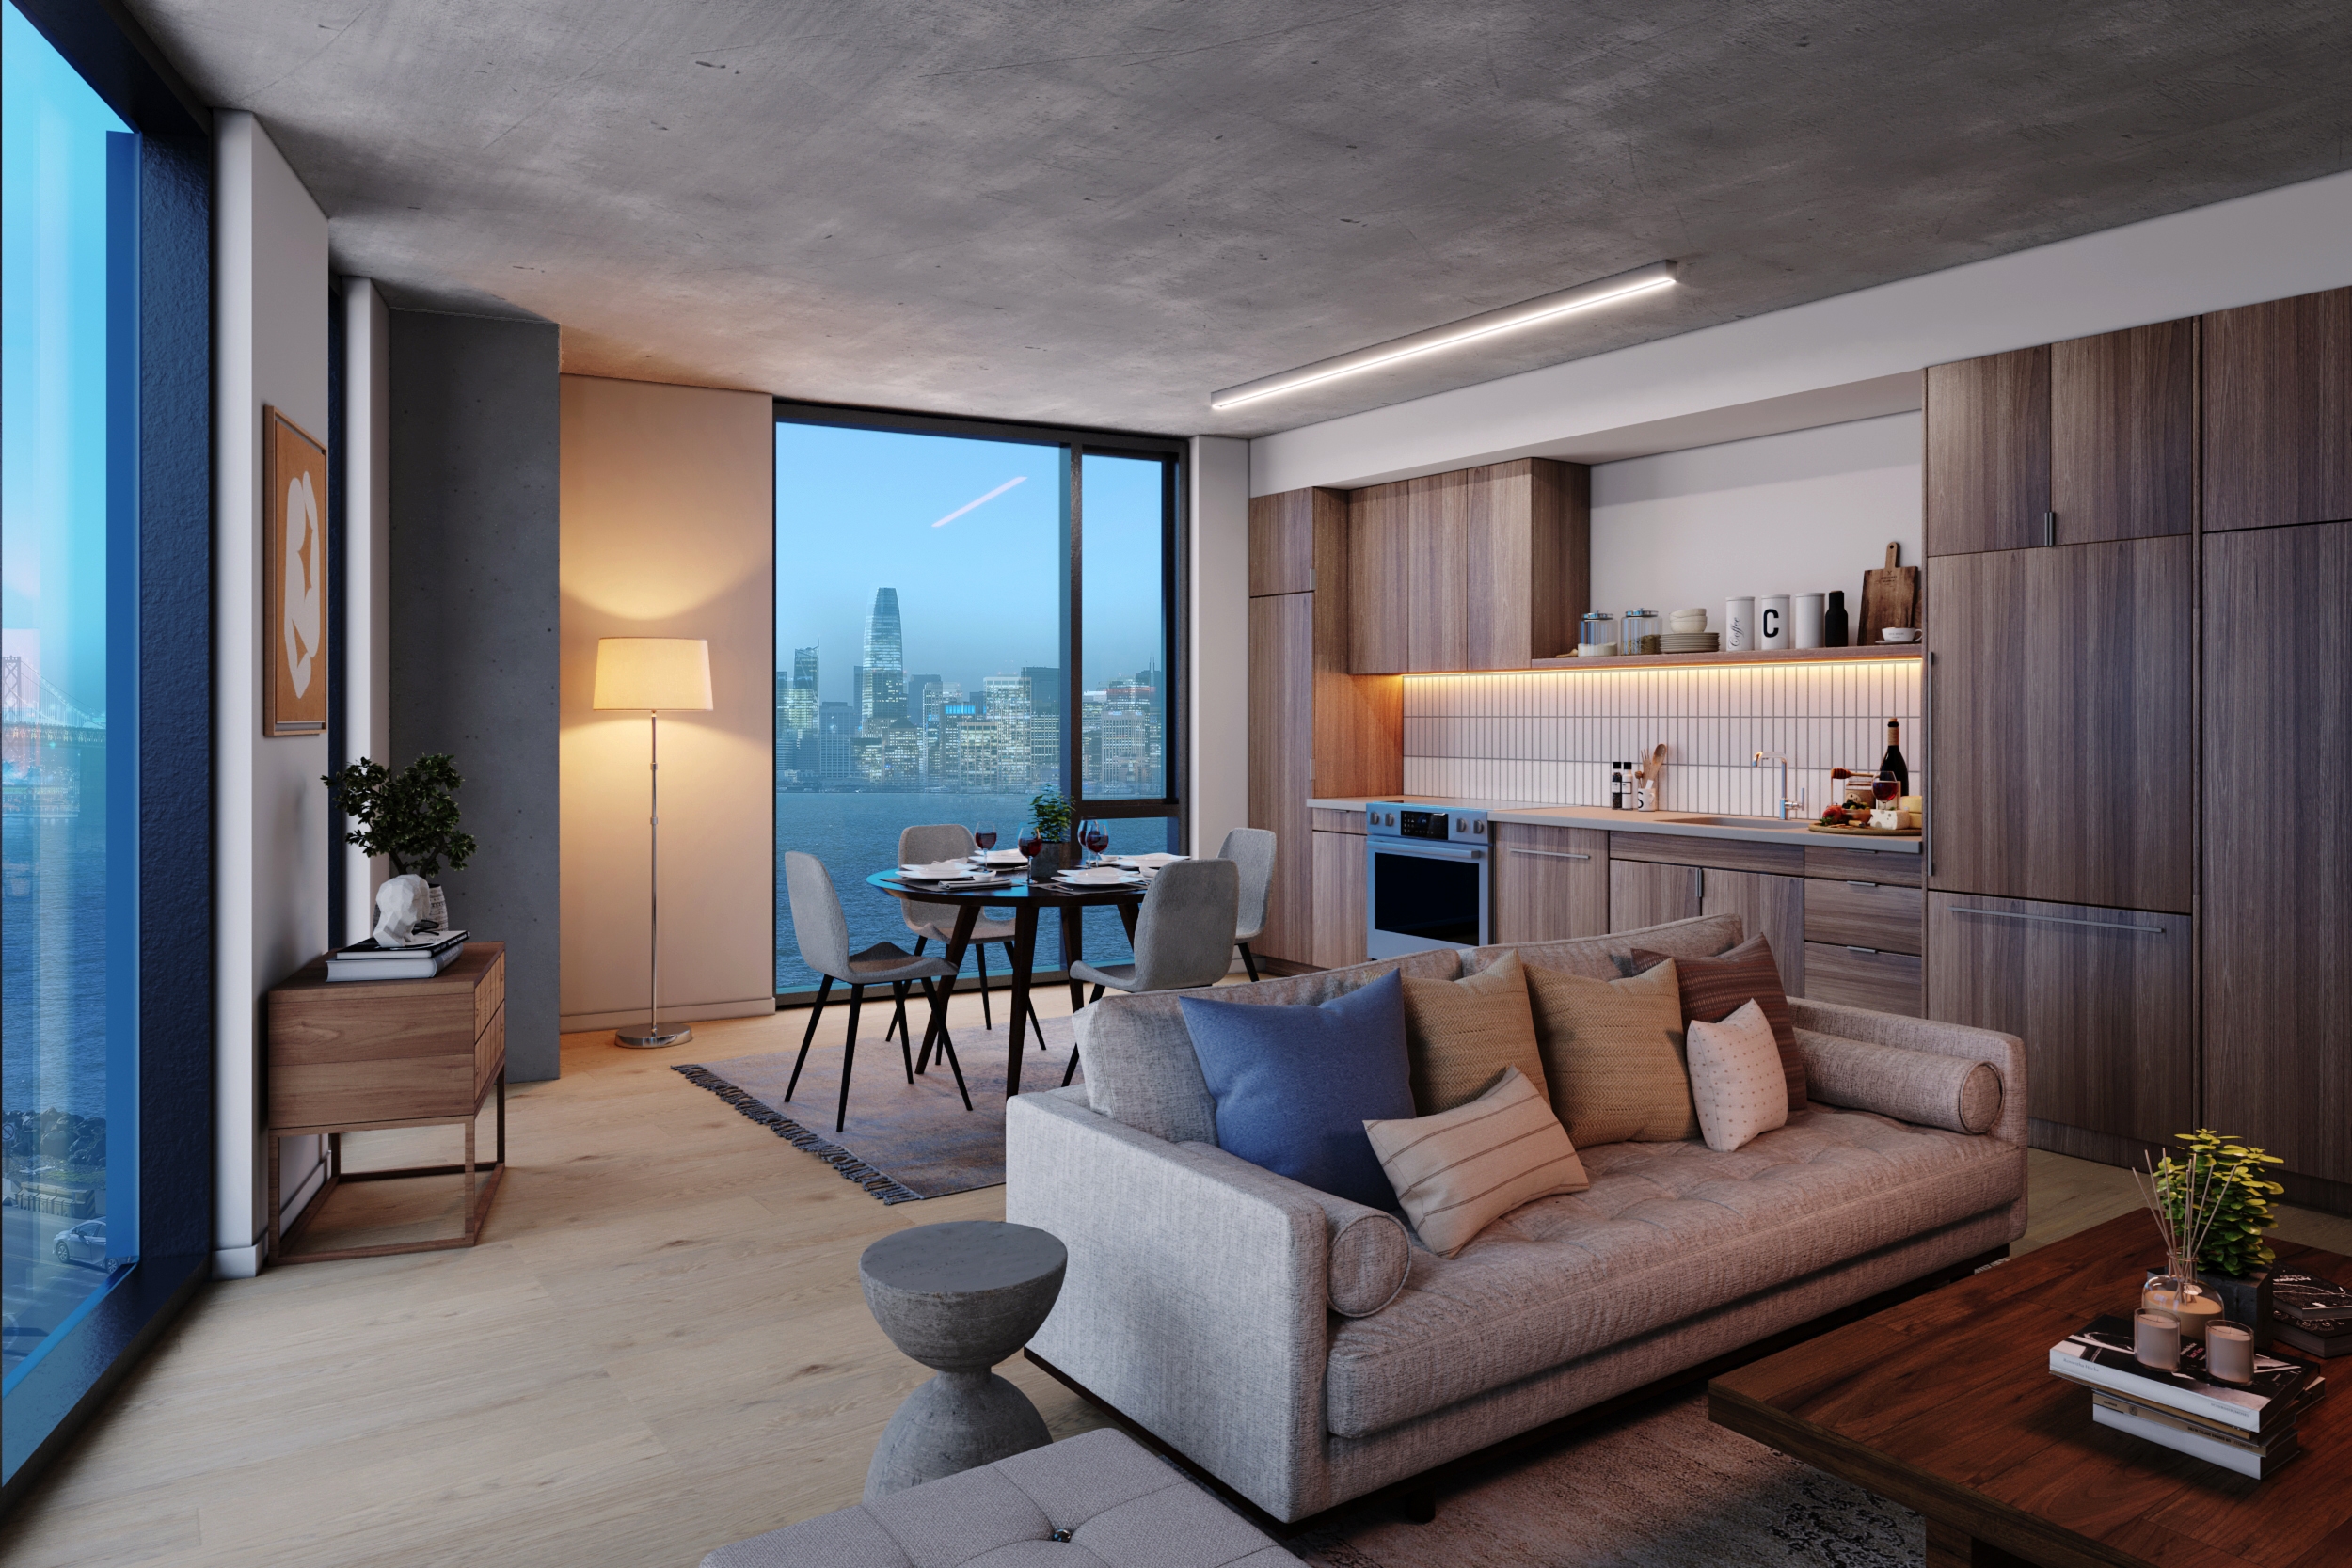 Rendering of a unit living room and kitchen with the view of the bay at night for Tidal House in Treasure Island, San Francisco, Ca.